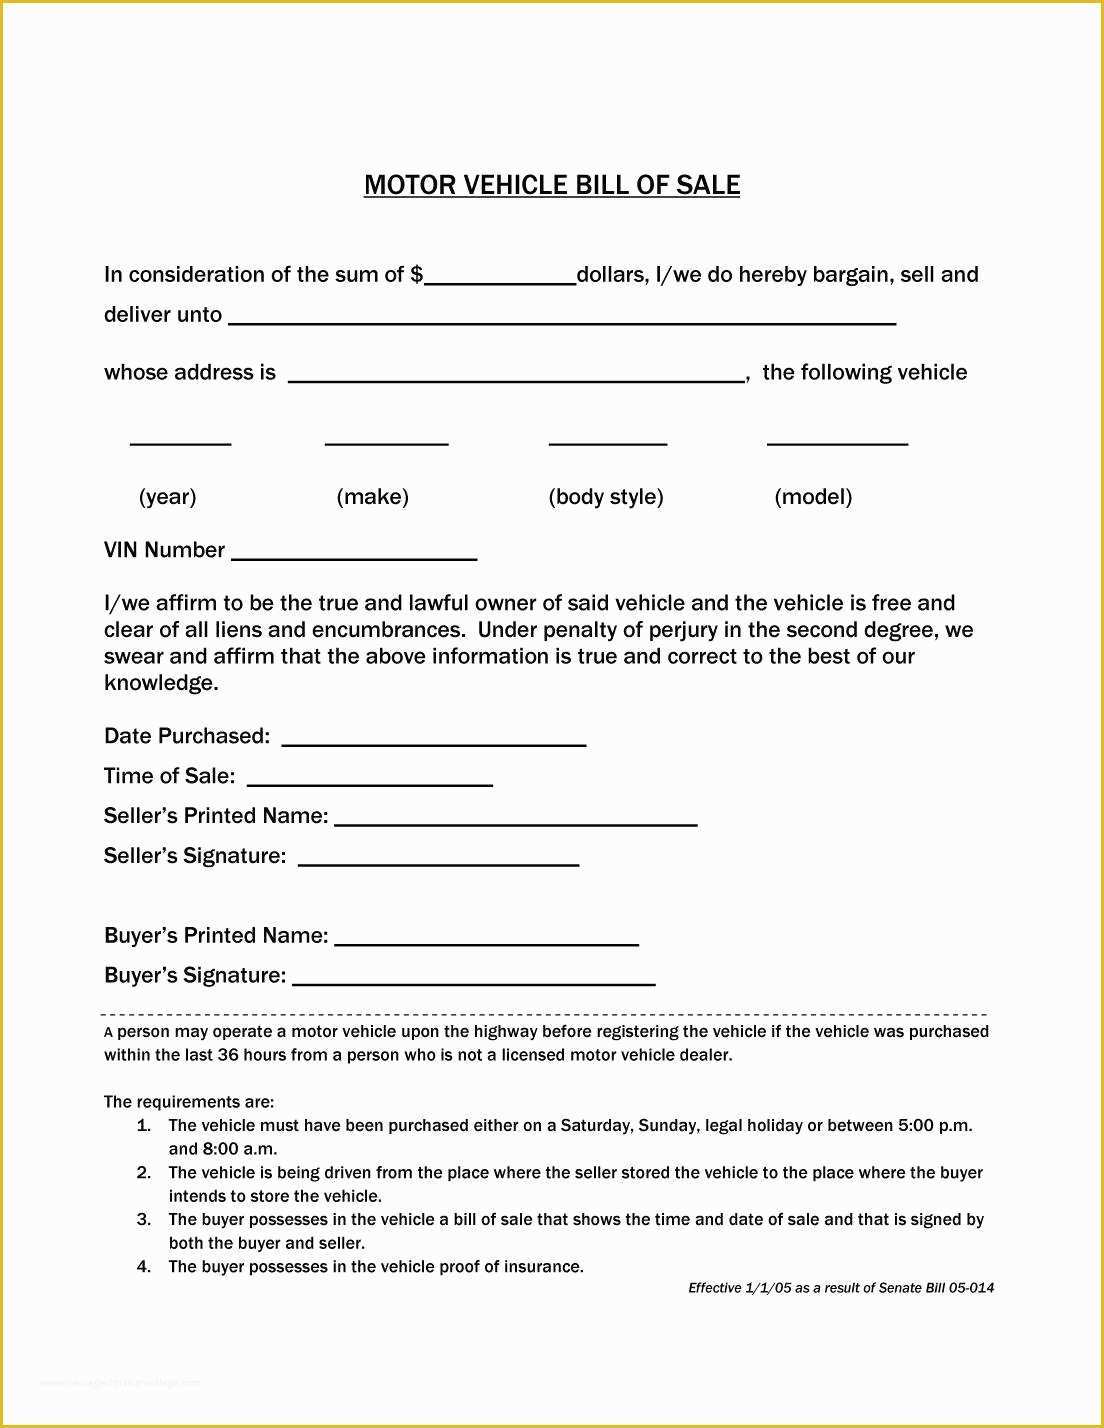 free-vehicle-bill-of-sale-template-of-45-fee-printable-bill-of-sale